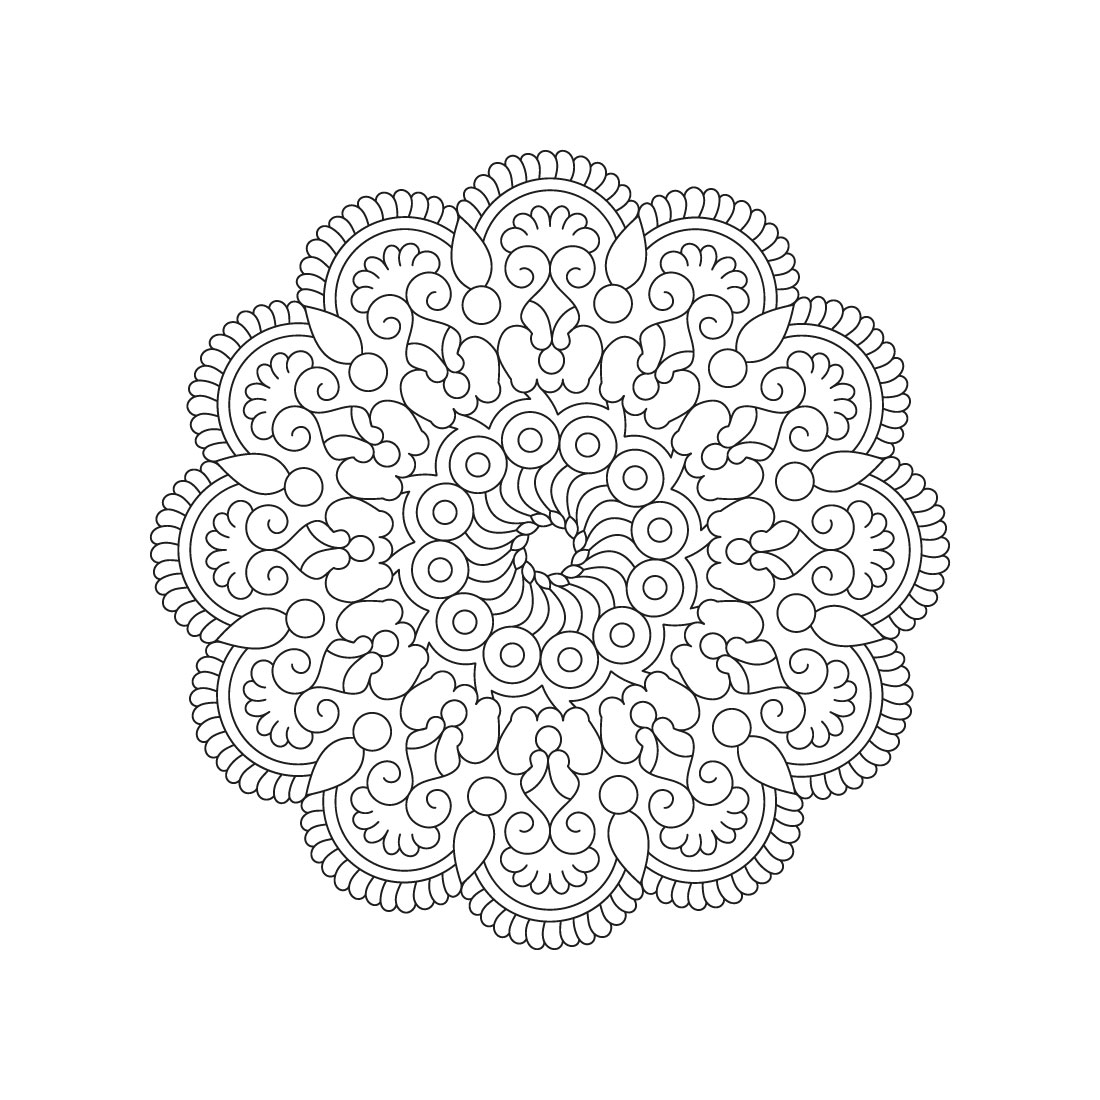 Bundle of 10 Tranquility Mandala for KDP Coloring Book interior Pages preview image.